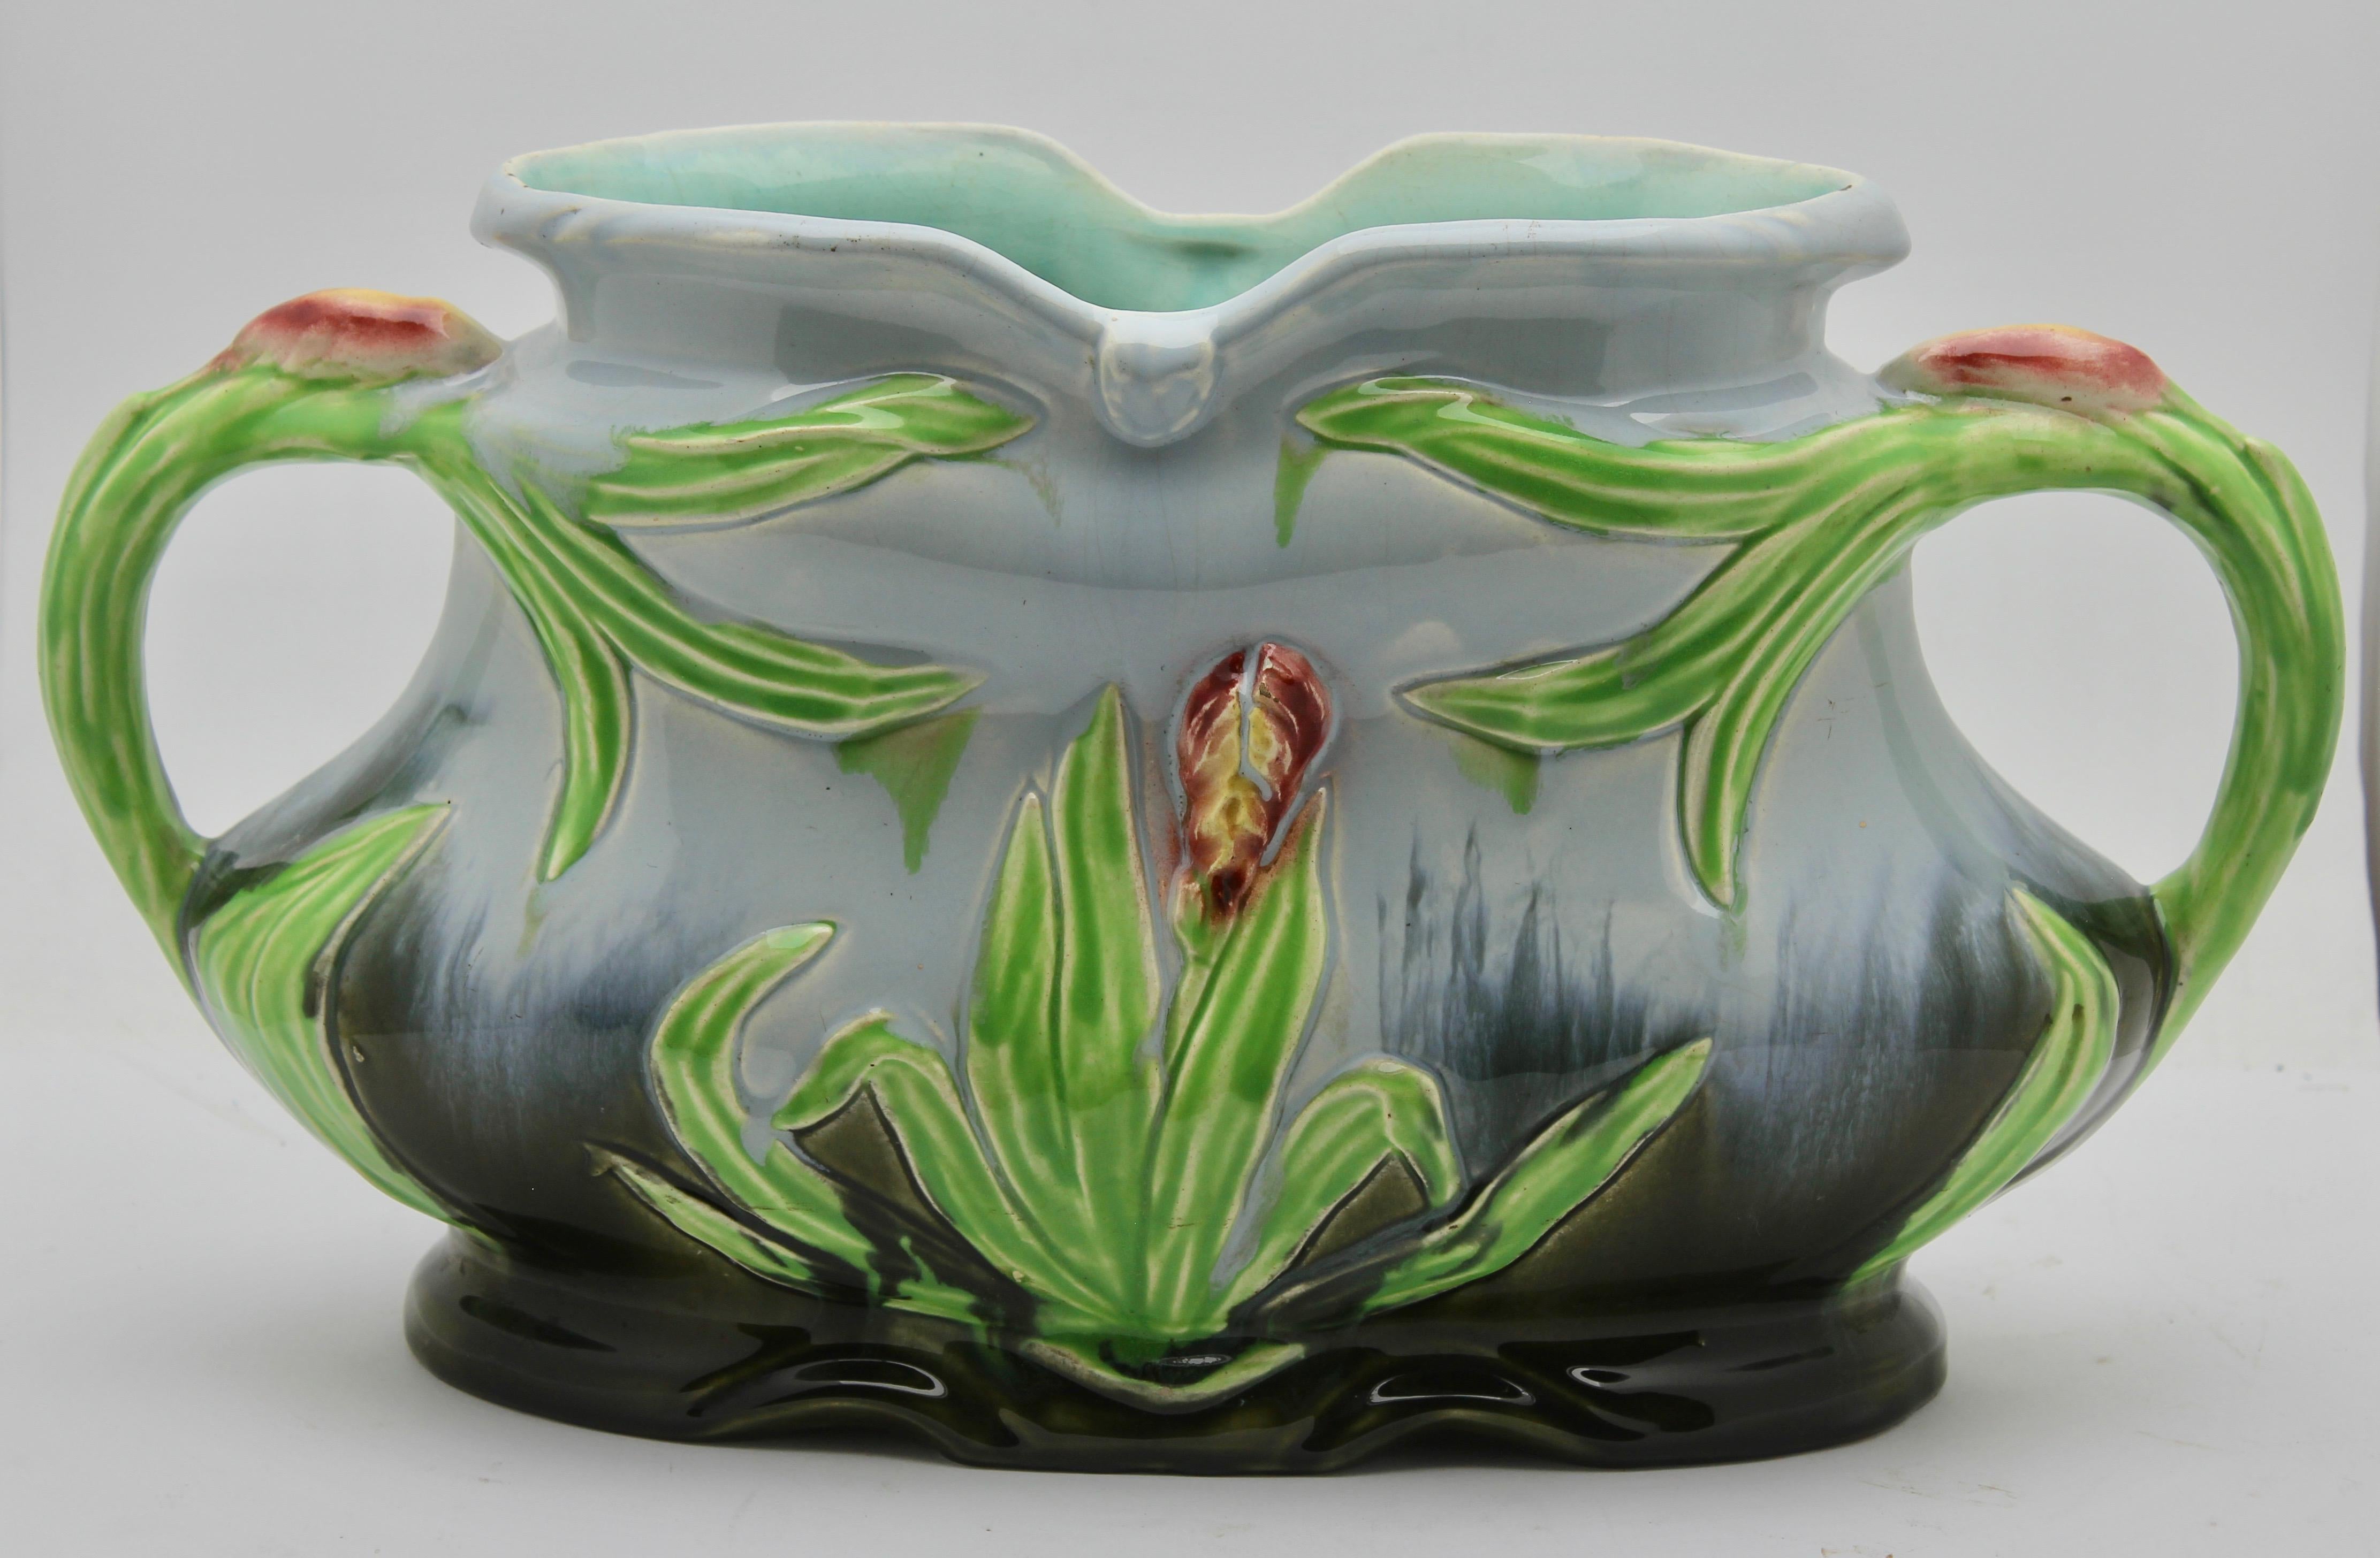 Early 20th Century Art Nouveau Majolica Planter Vase and Jardiniere Set with Flag-Iris Decoration